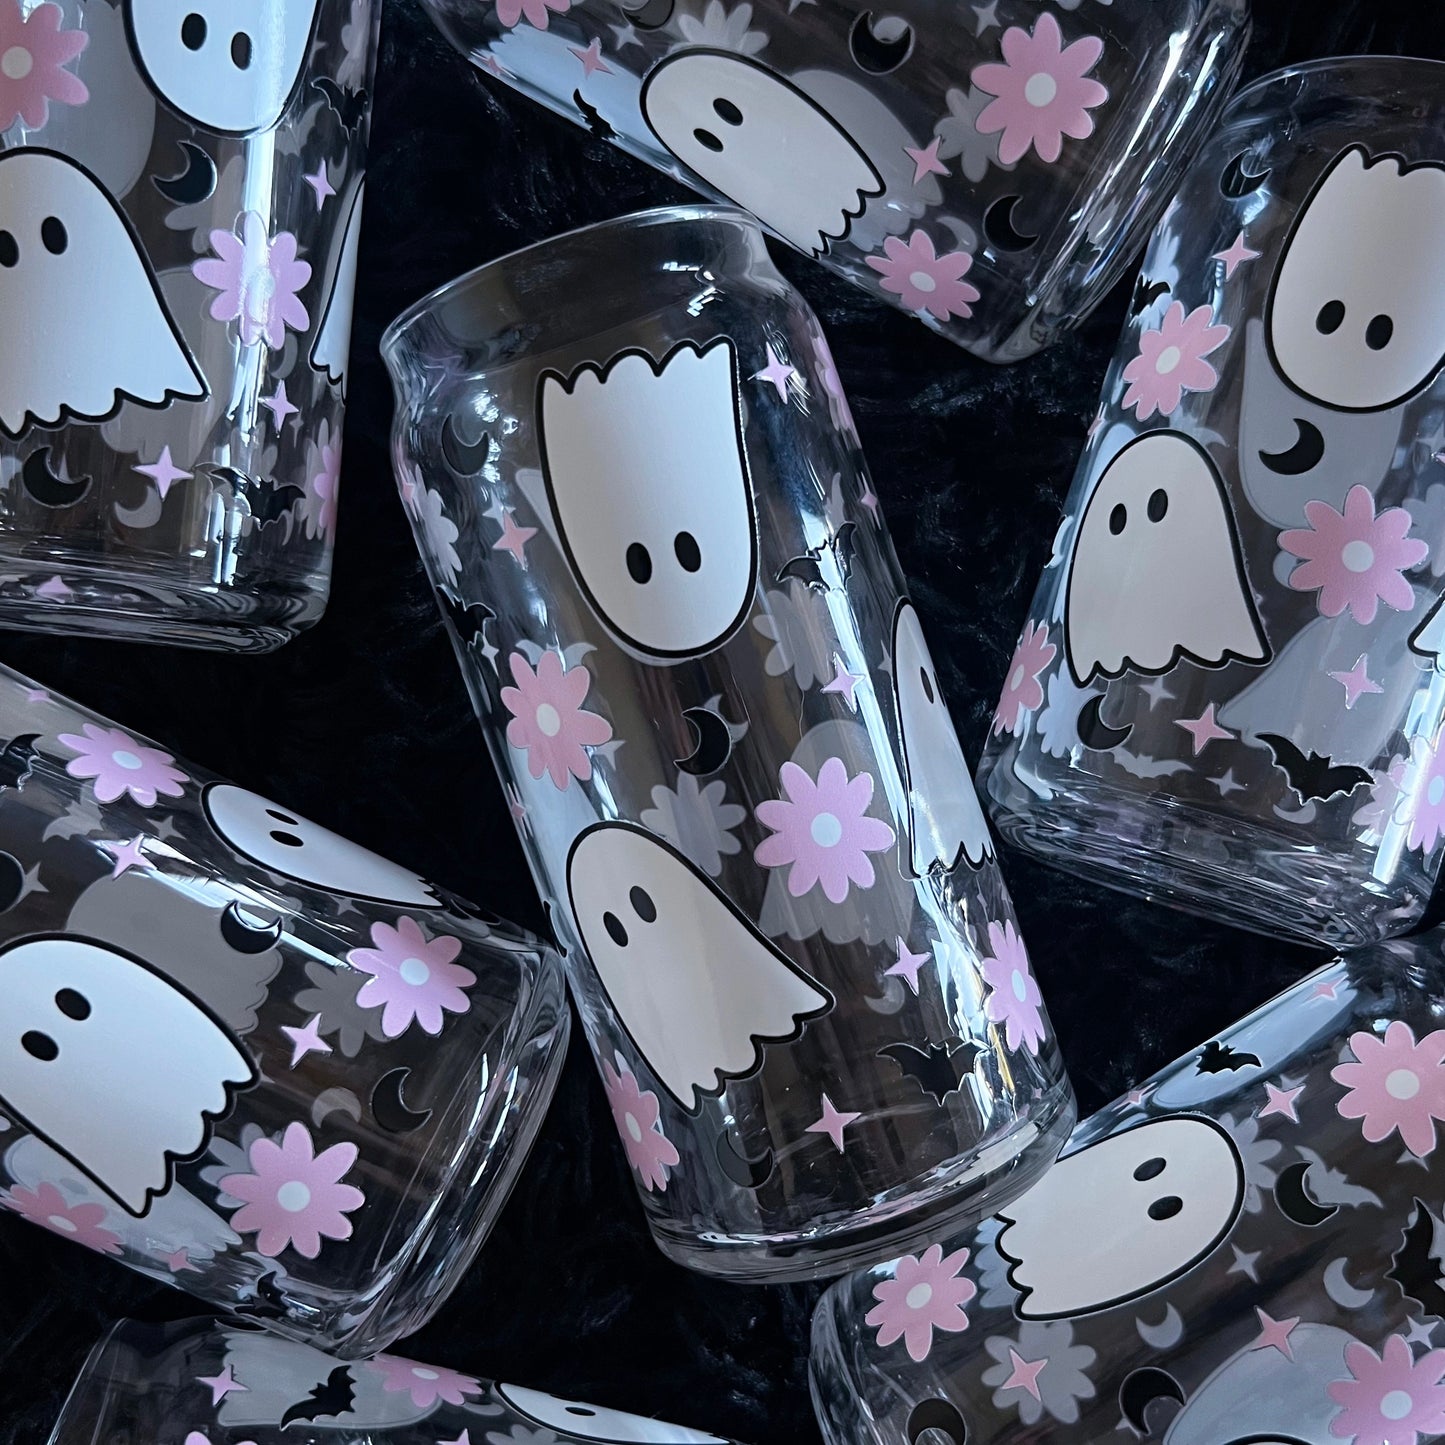 Cute ghosts and pink flowers